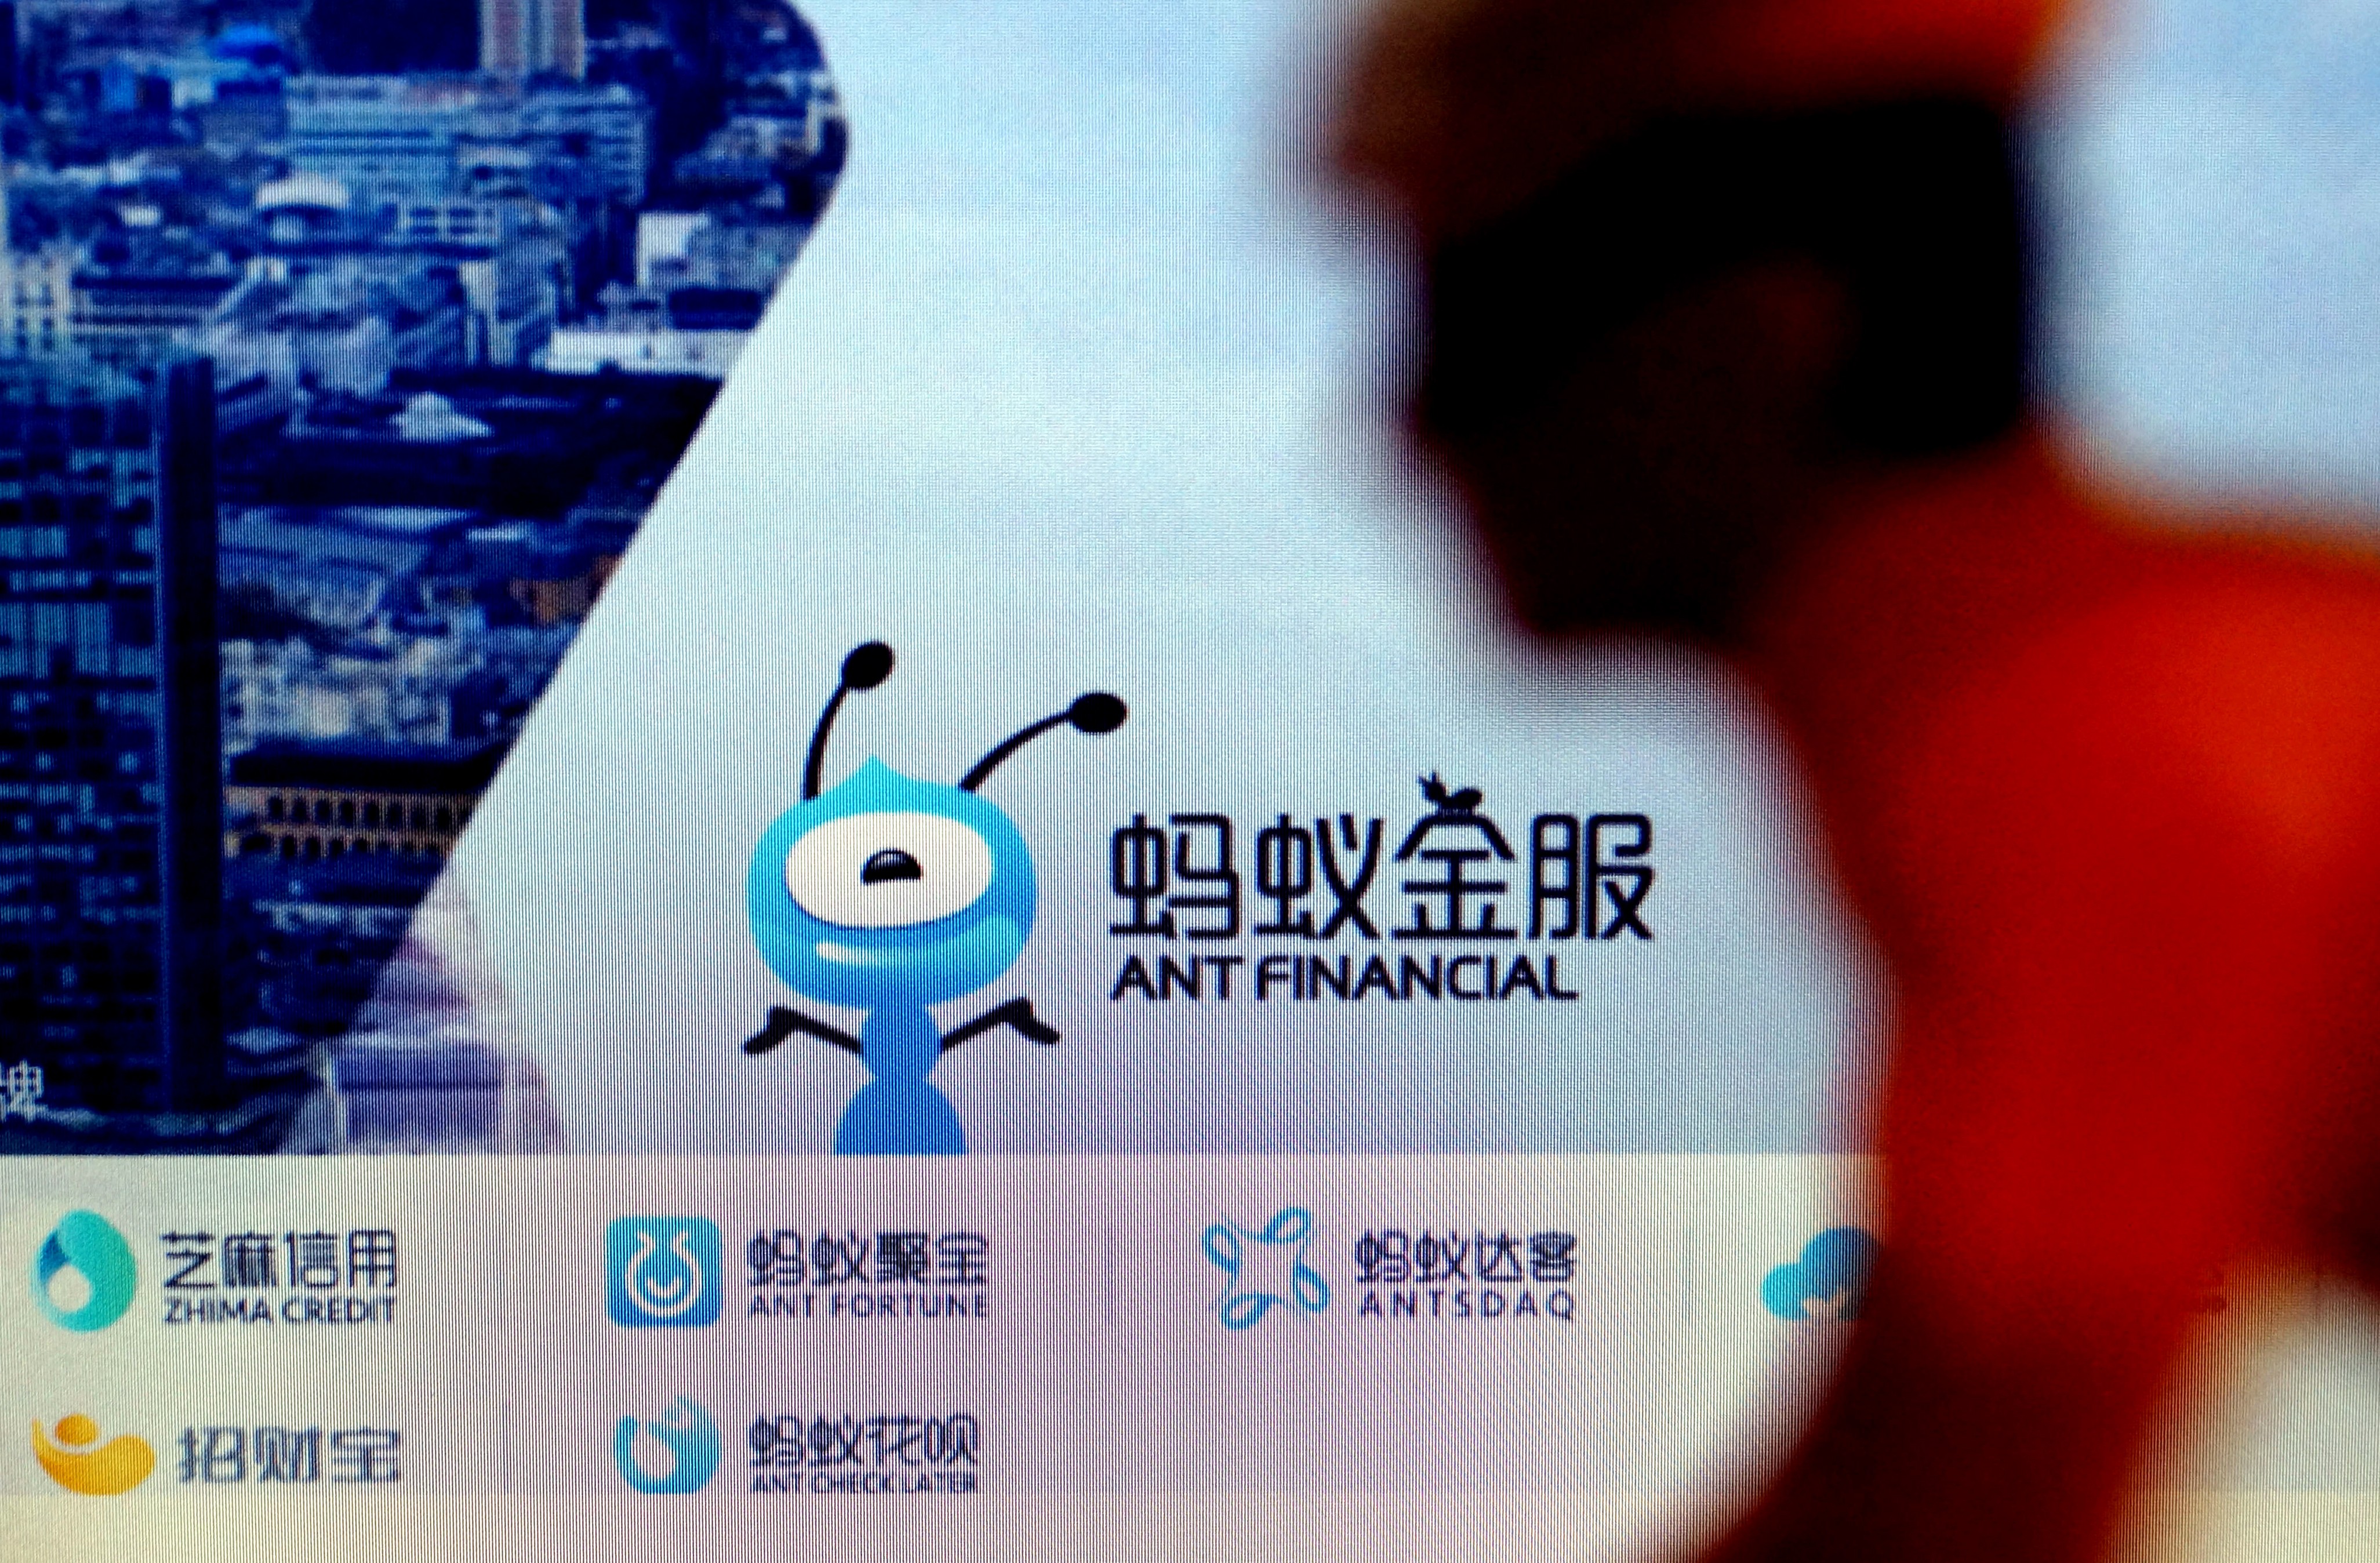 China’s ‘big five’ state banks have all formed alliances with technology companies such as Ant Financial. Photo: Imaginechina